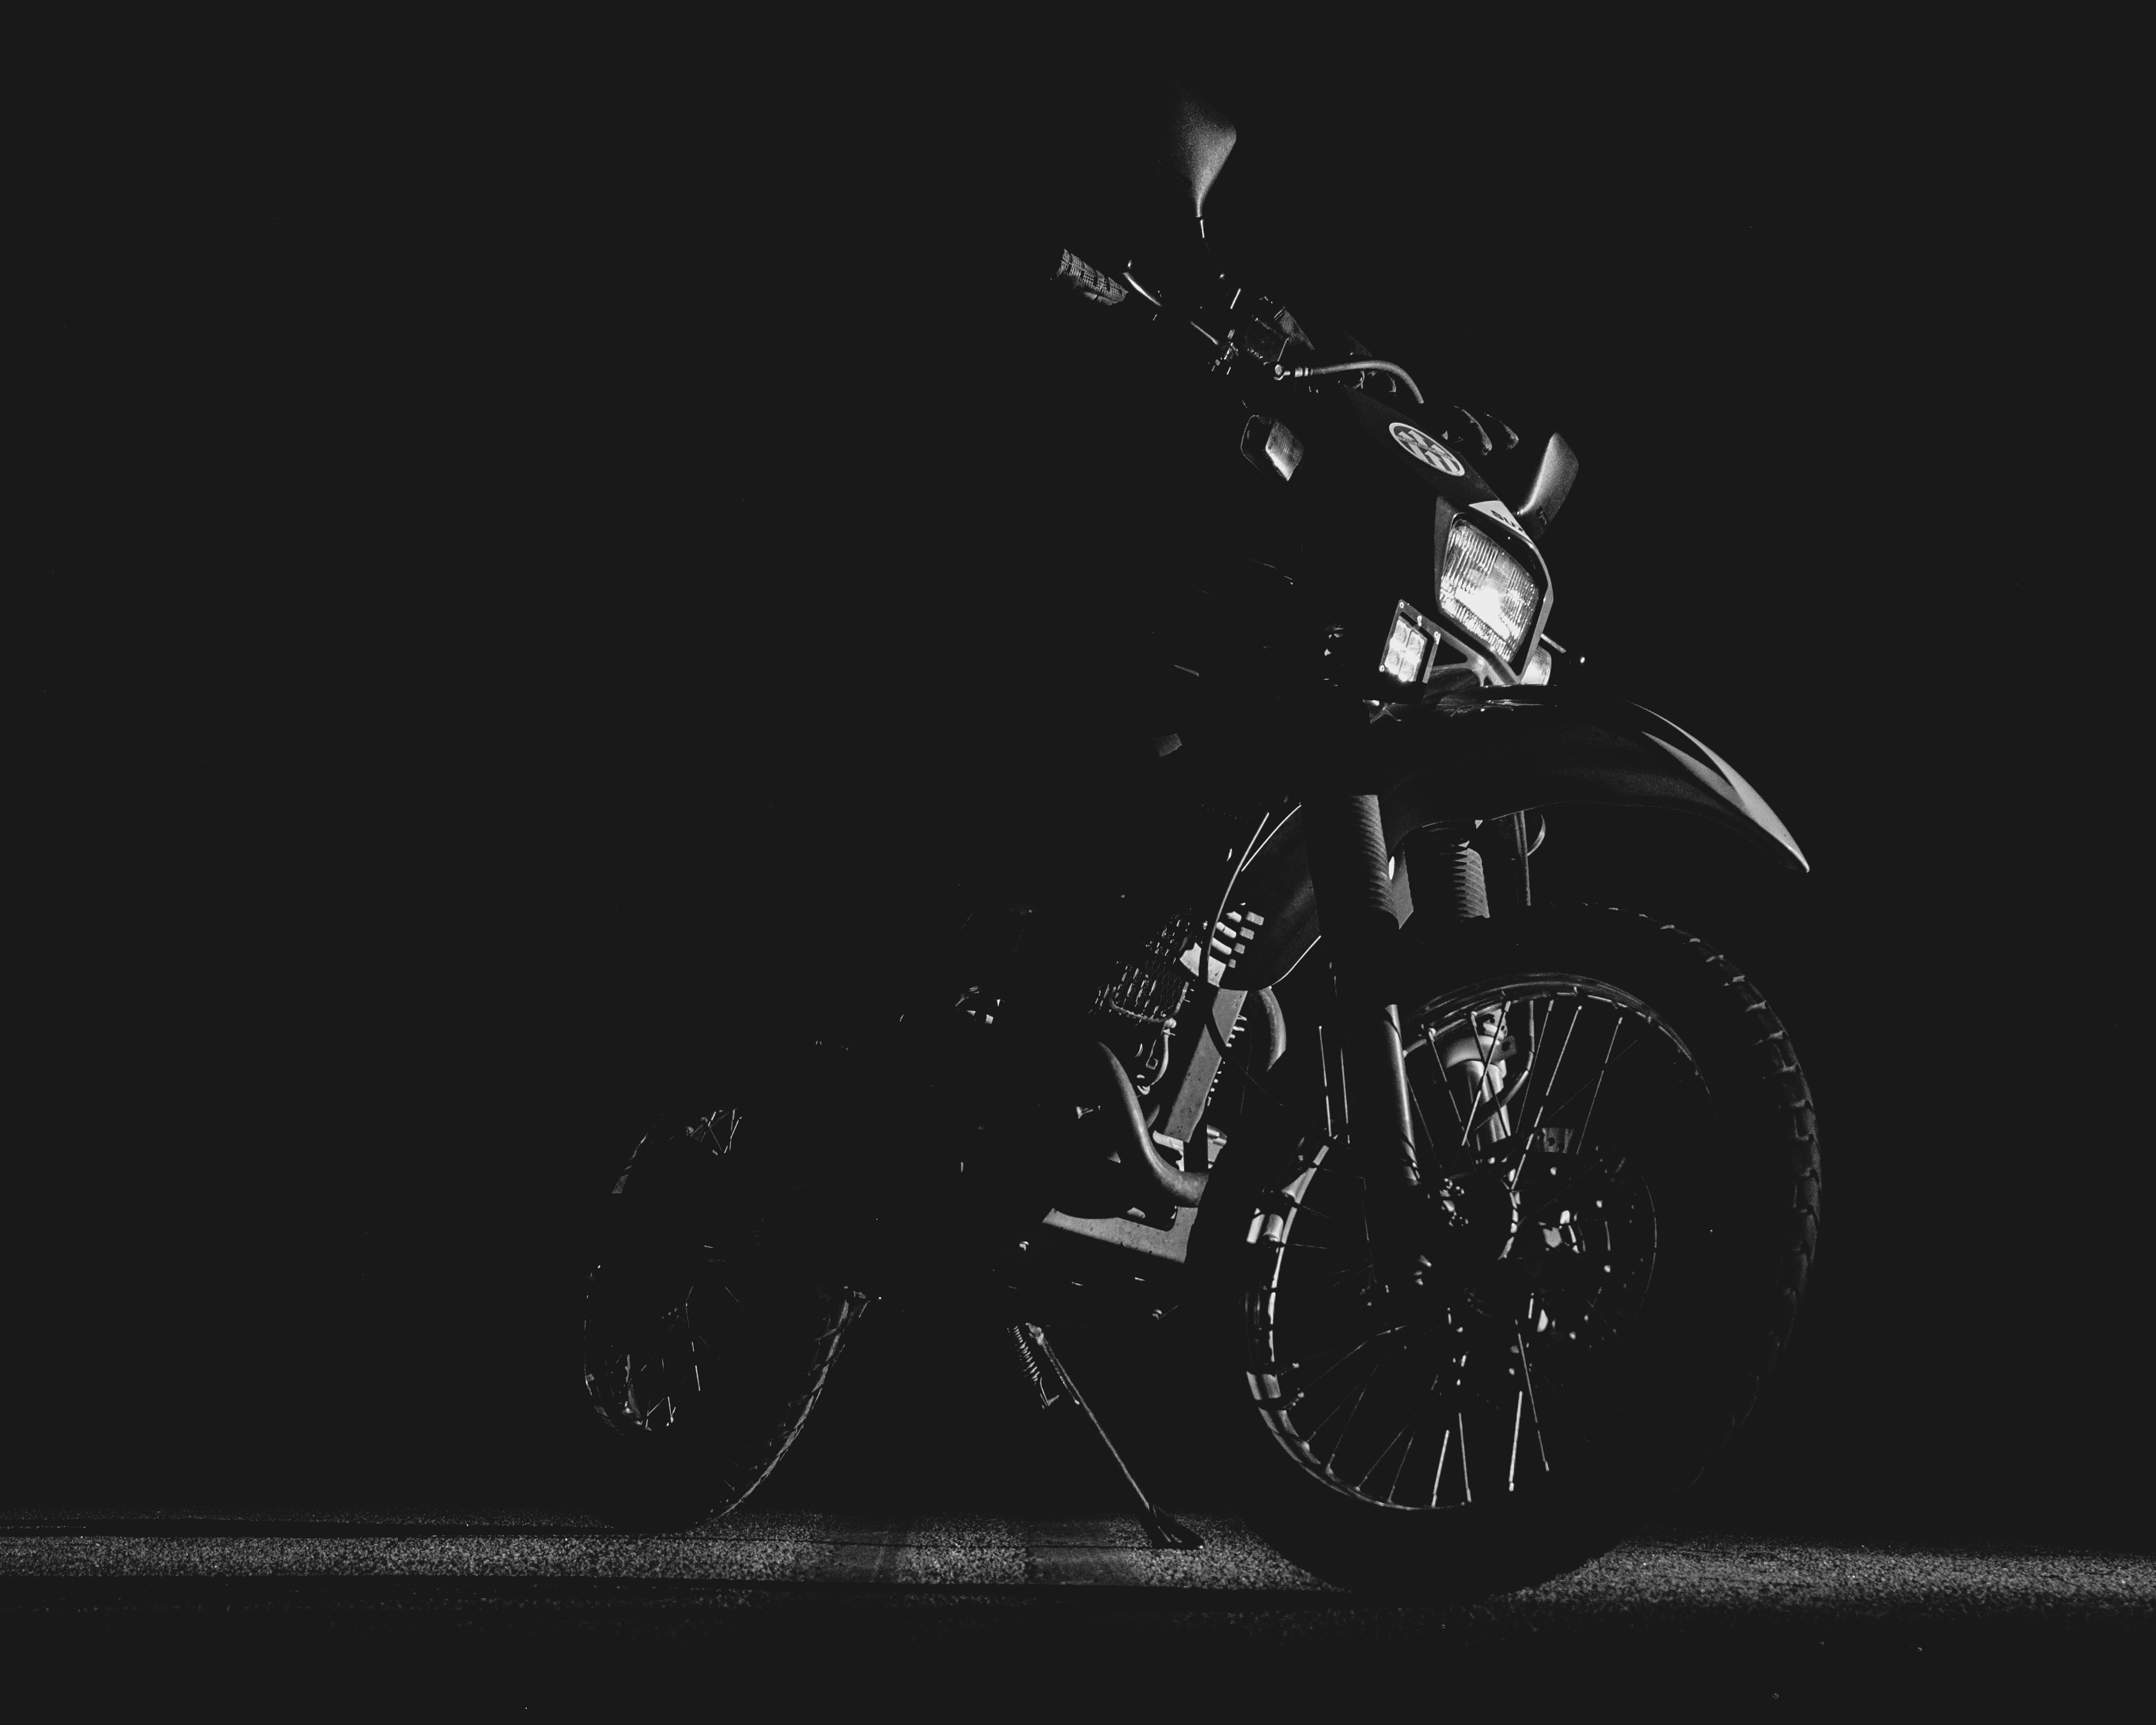 bw, steering wheel, motorcycle, motorcycles, darkness, chb, wheel, rudder High Definition image